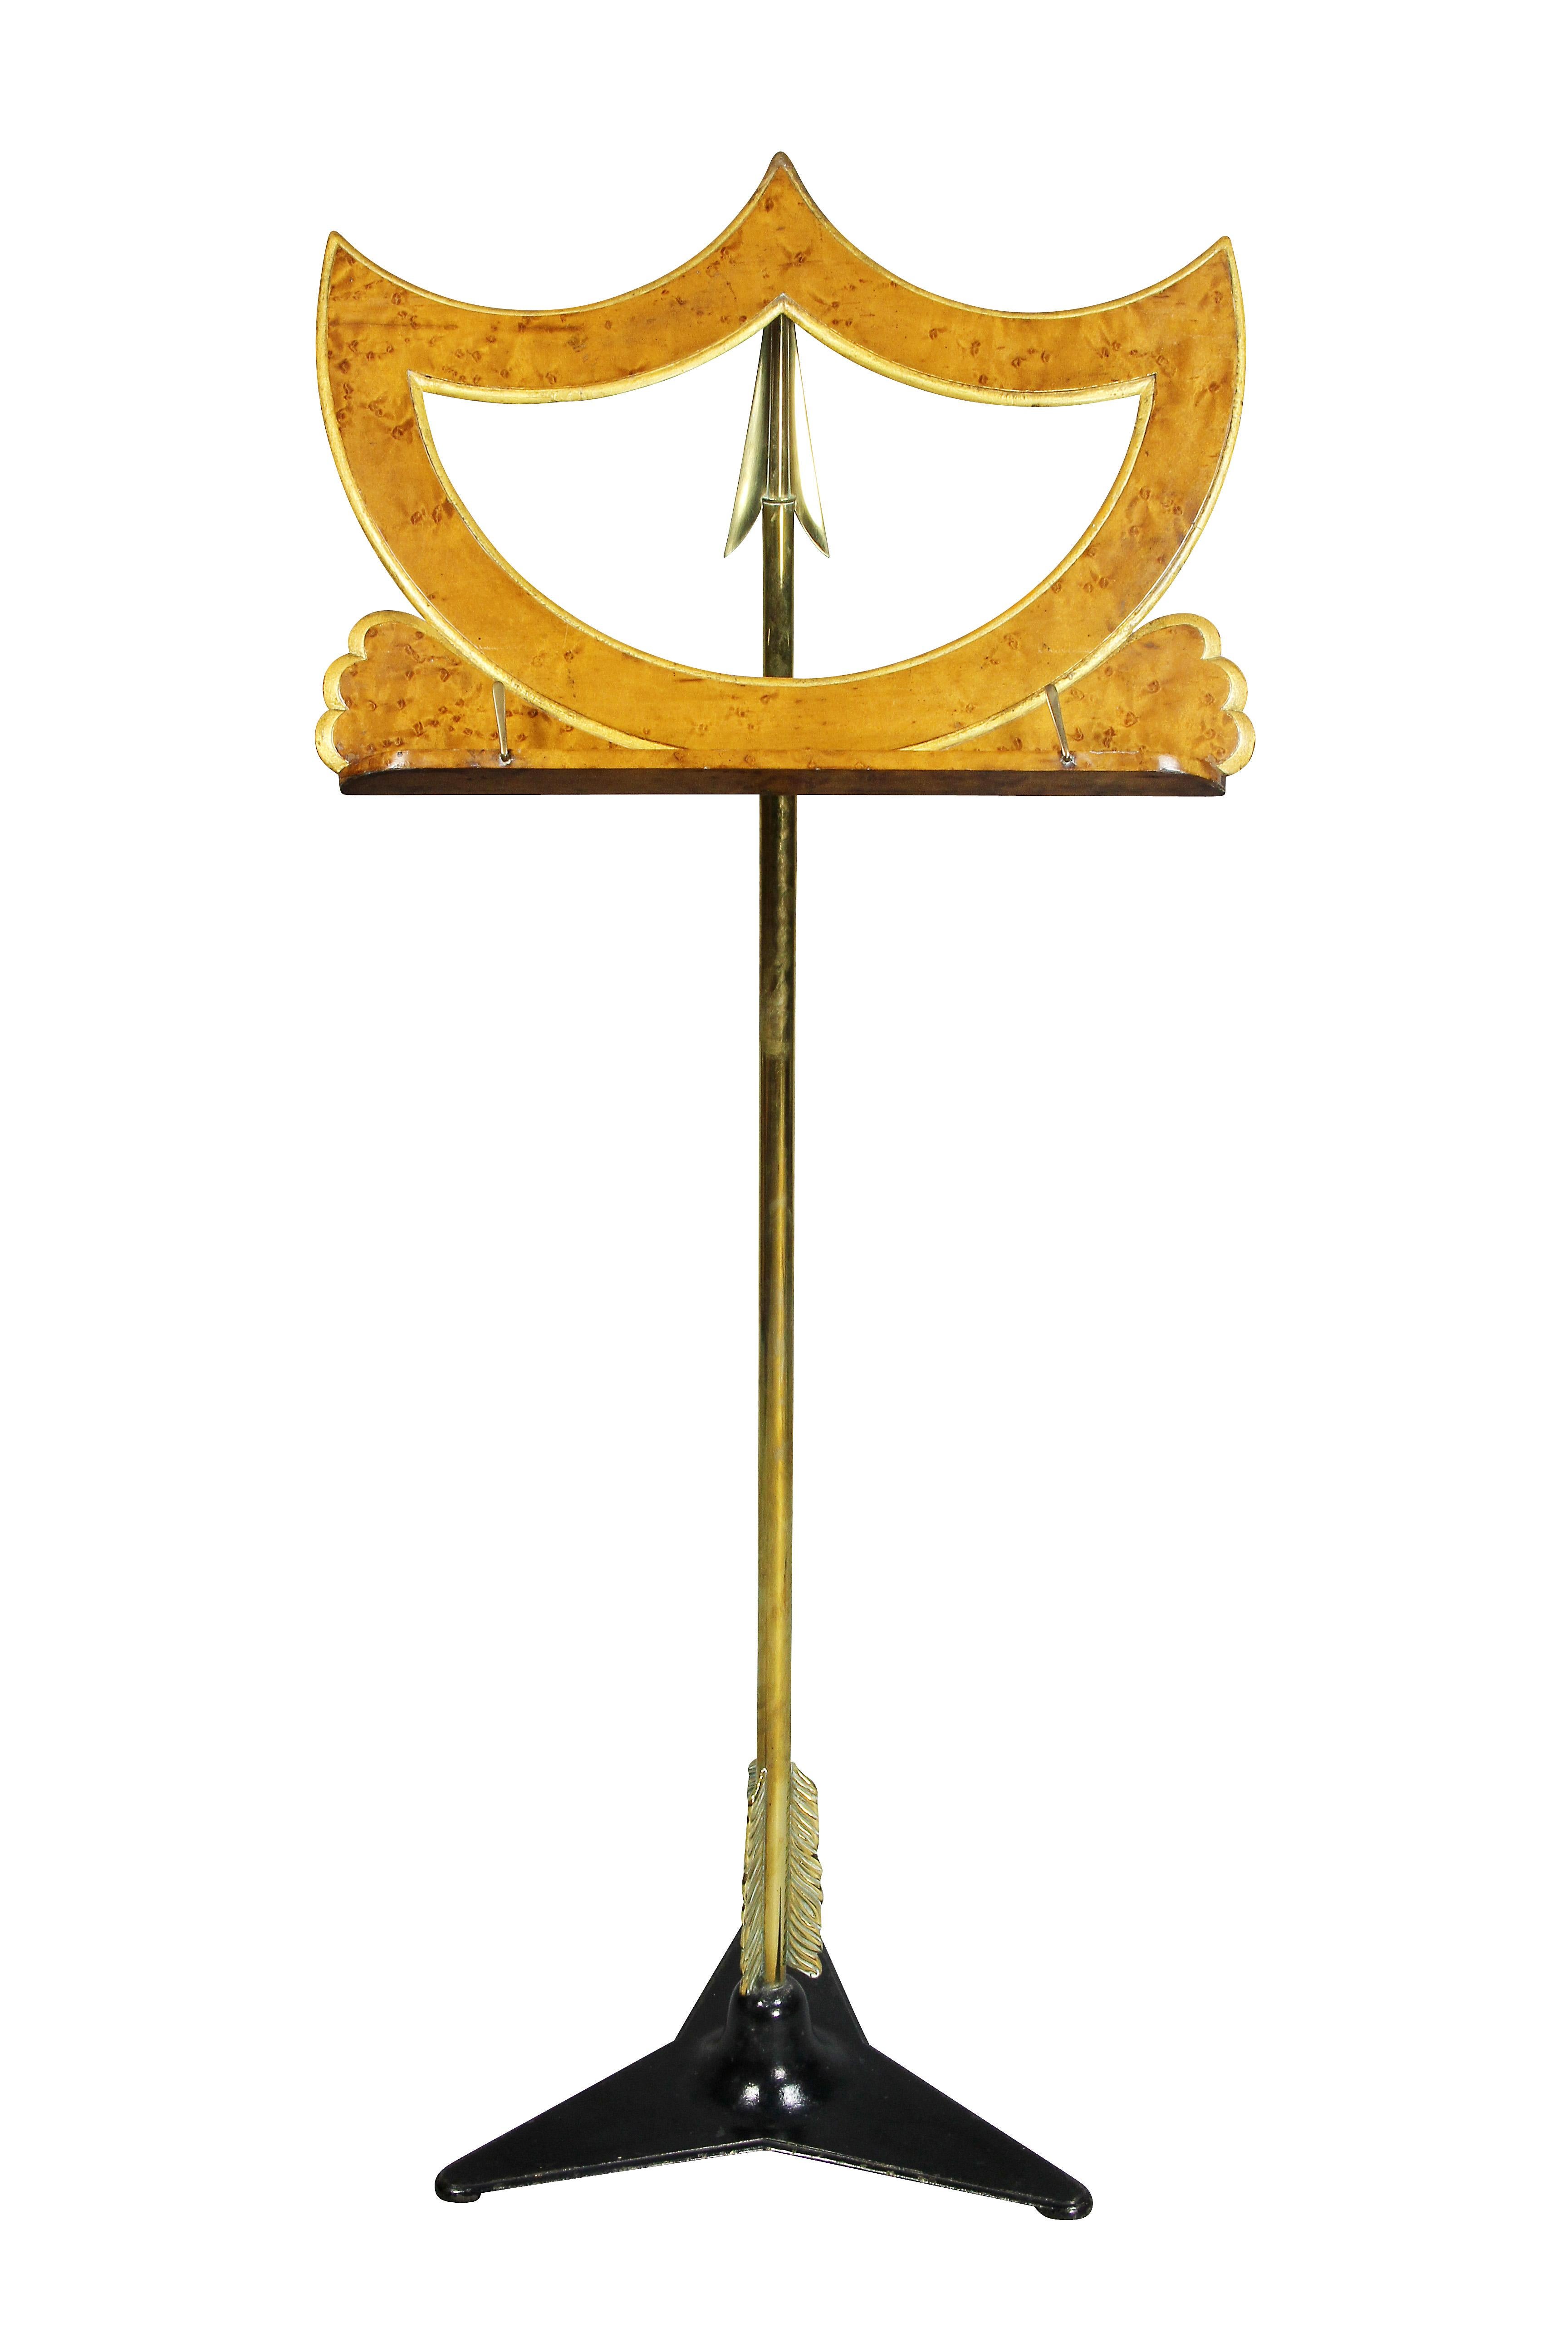 Shield shaped top and adjustable brass arrow form support, triangular black painted iron.